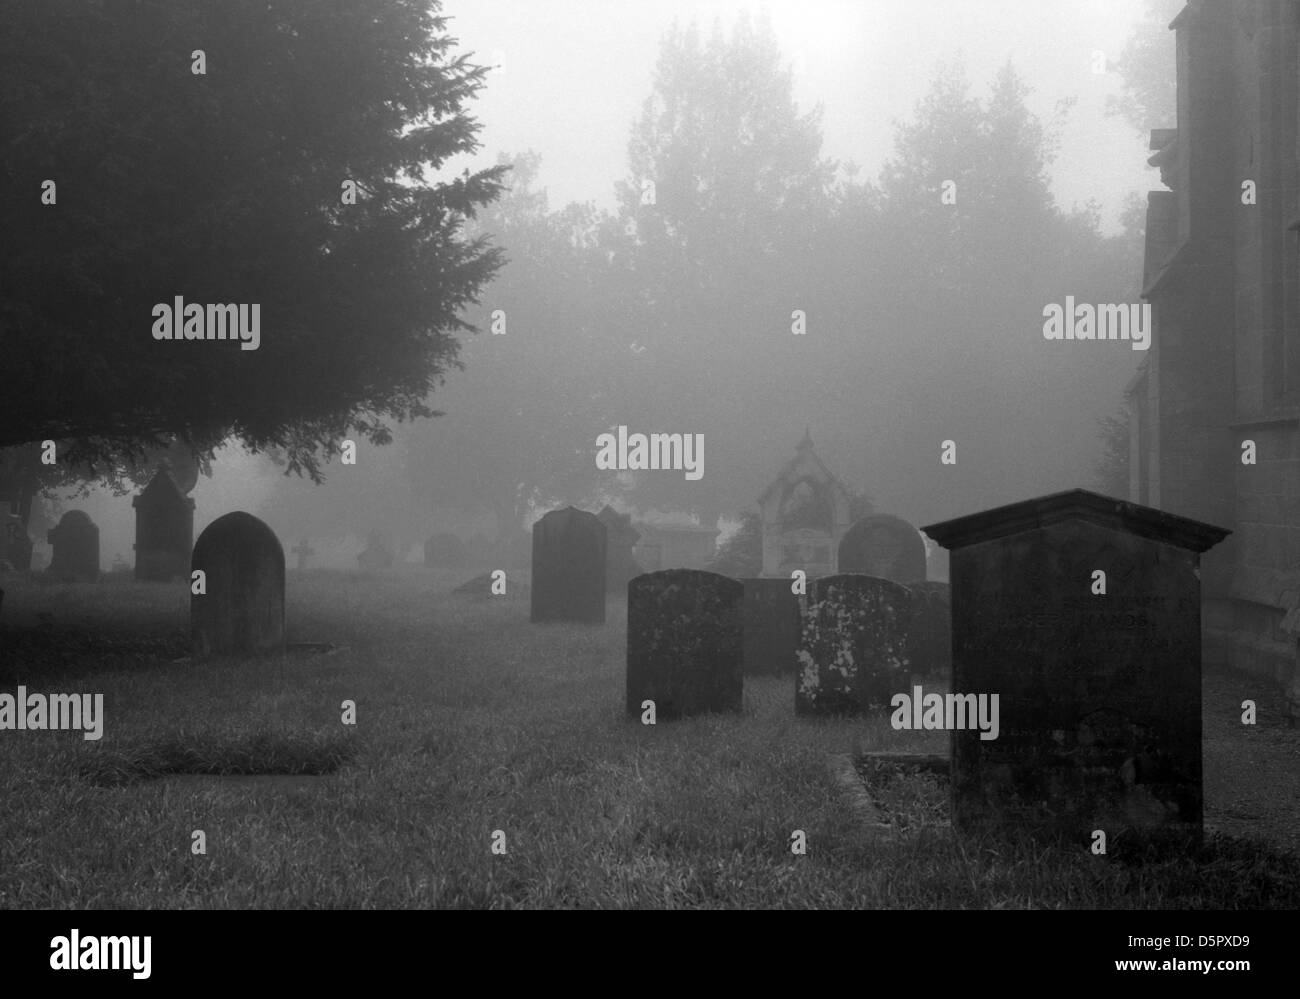 gravestones appear out of the fog in a misty graveyard Stock Photo